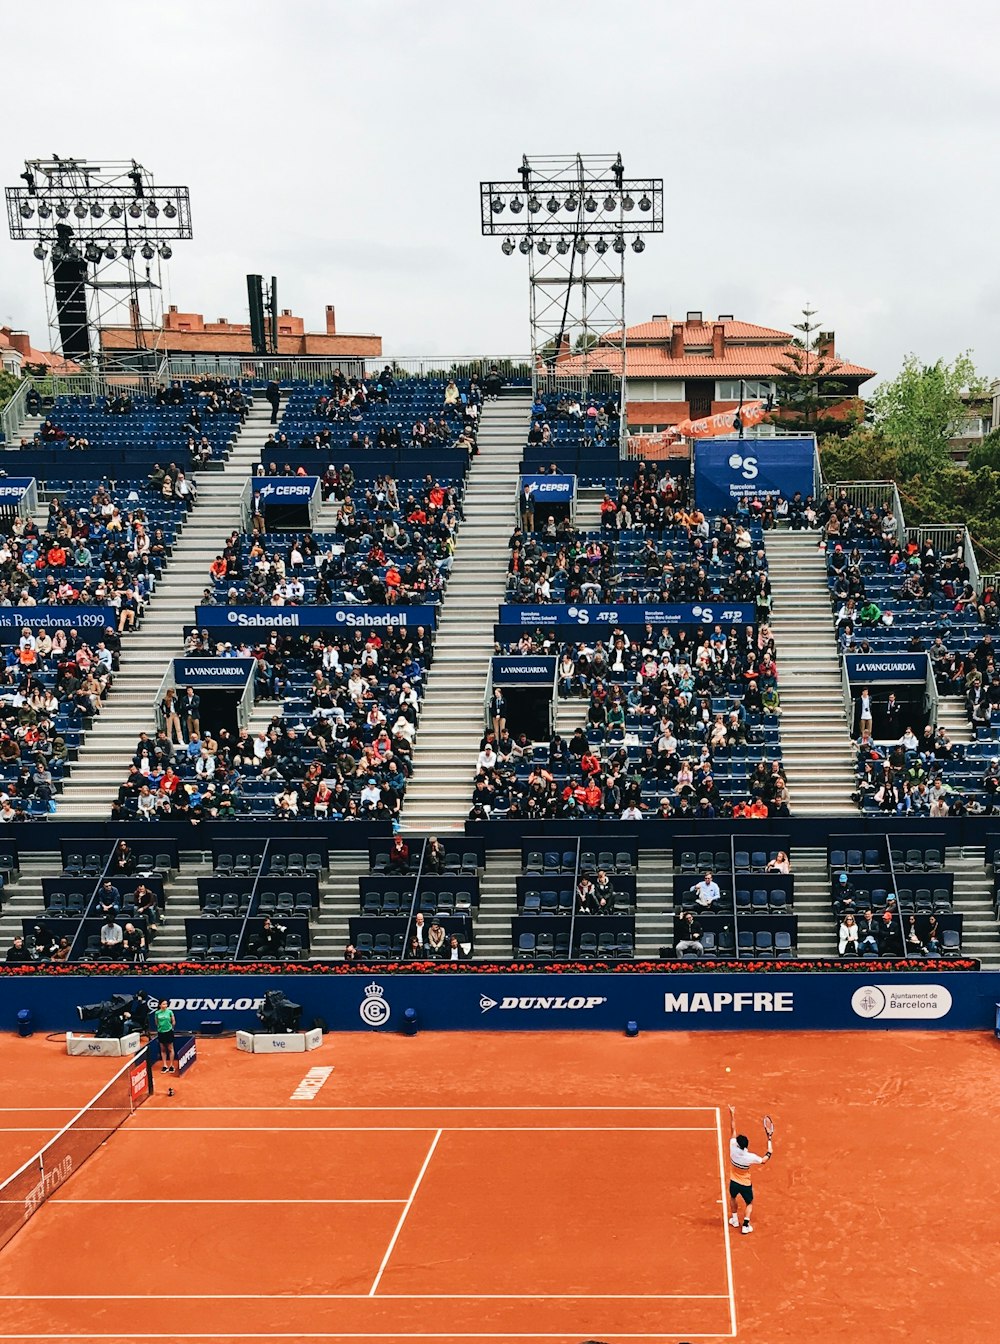 people sitting on bleachers while watching lawn tennis game during daytime